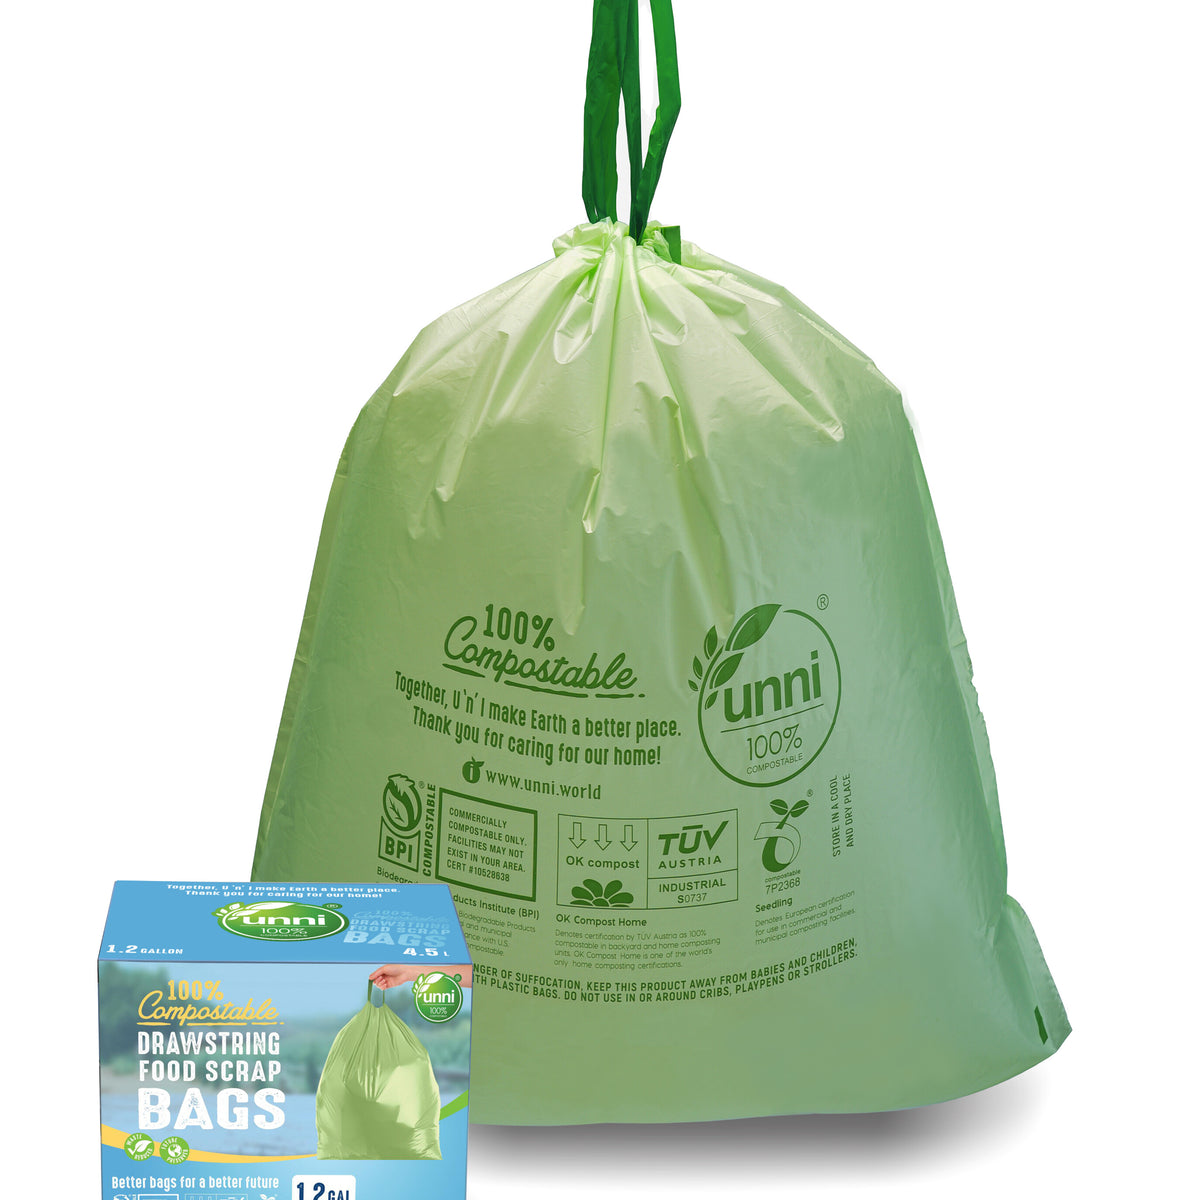 Compostable Trash Bags for Kitchen Compost Bin - Fits 1, 1.2, 1.3, 1.5  Gallon Biodegradable Compost Bags for Kitchen Pail liners- Package of 2-50  bags per Roll fits Gardenatomy, Goldsol and Other Bins